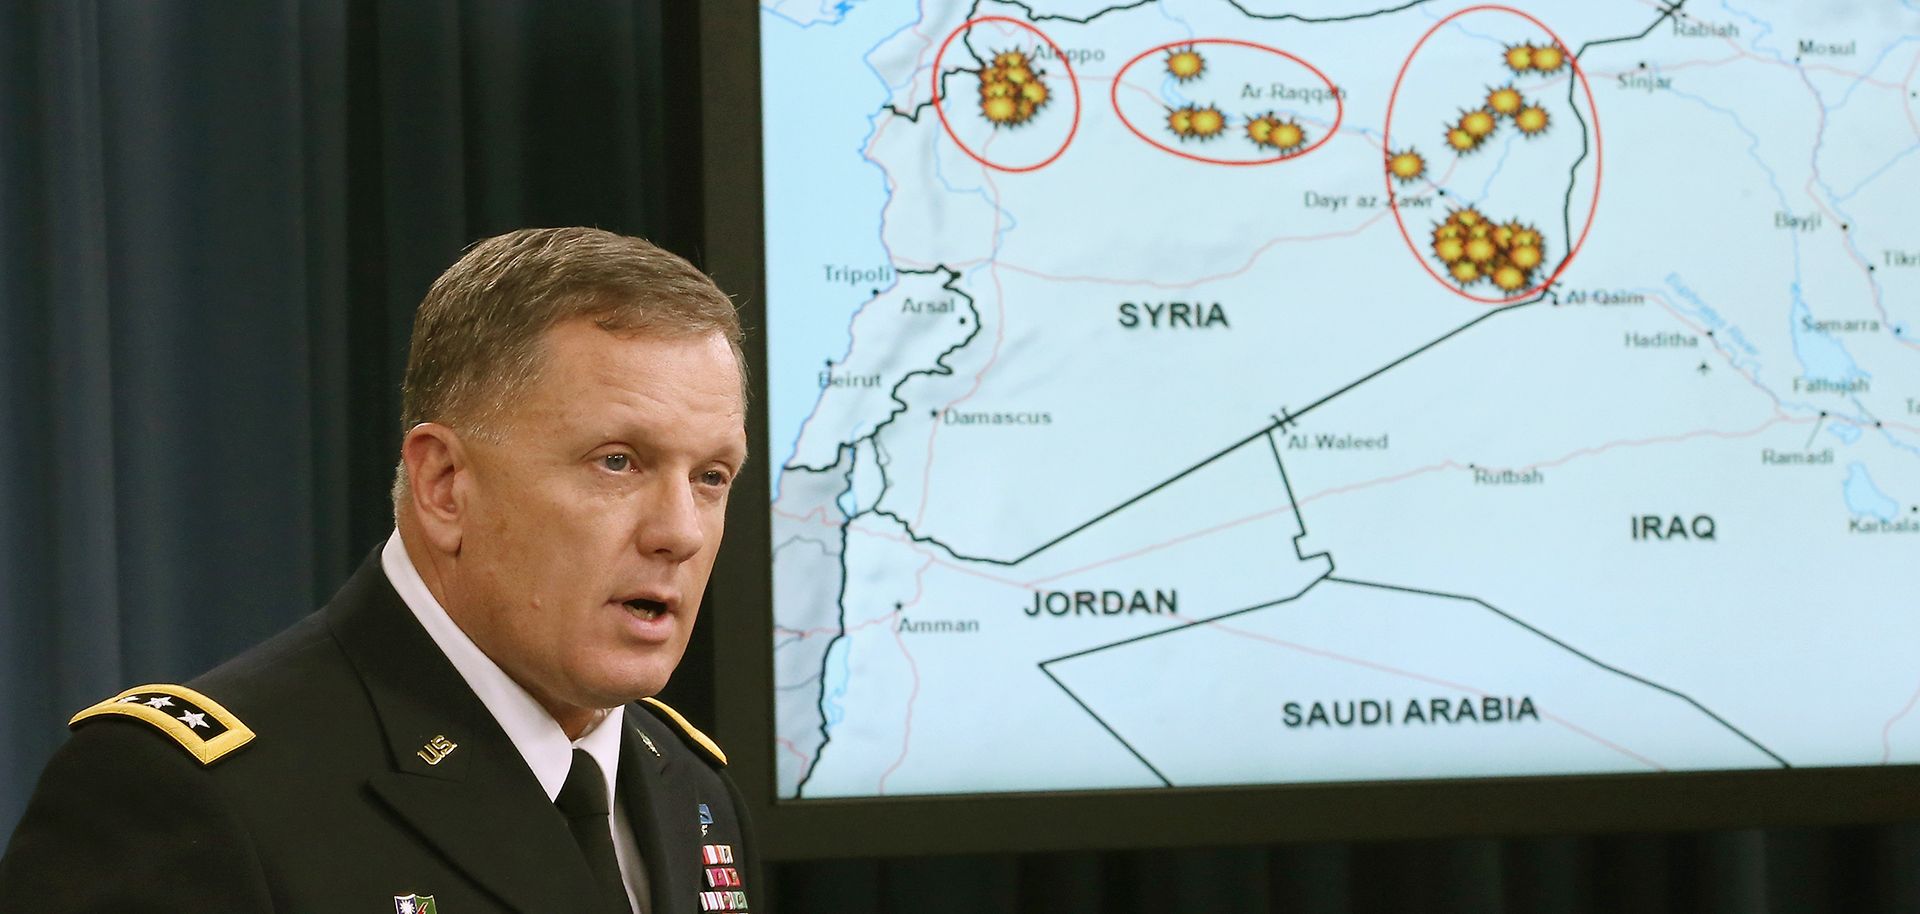 The U.S. Copes With Complex Logistics in Syria 